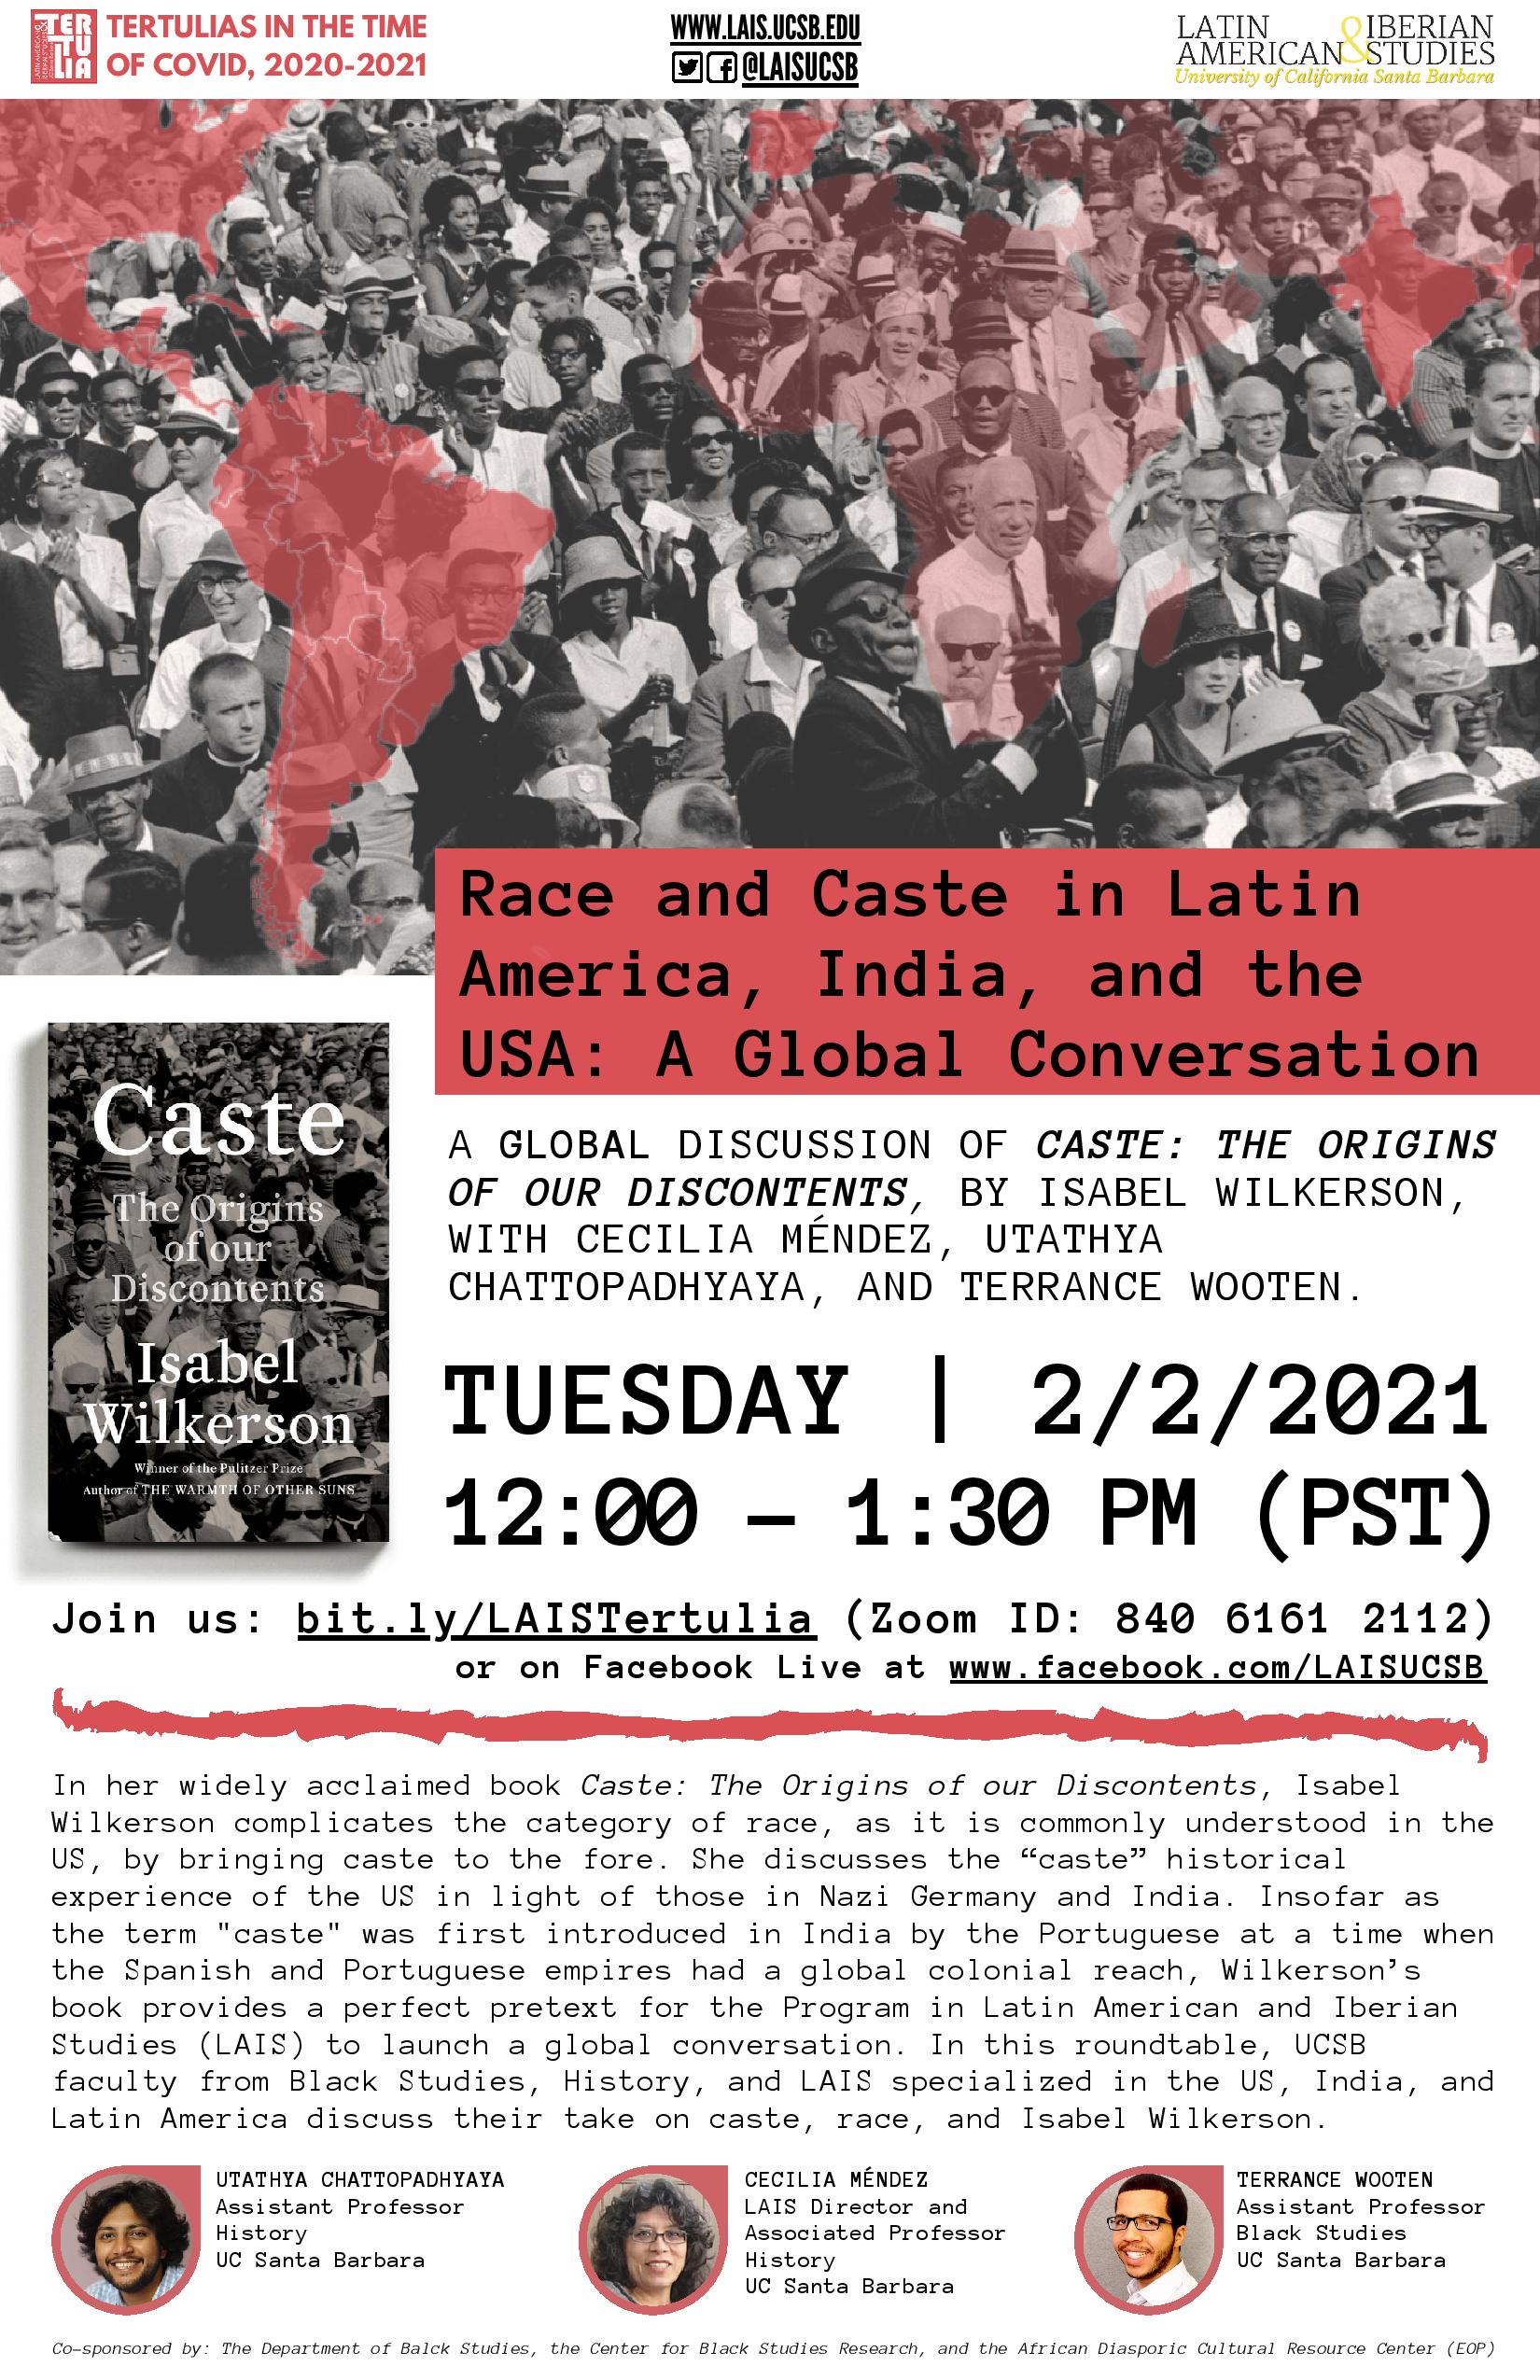 Flyer for Zoom talk for Race and Caste in Latin America, India, and the USA: A Global Conversation on 2/2/21 from 12-1:30PM